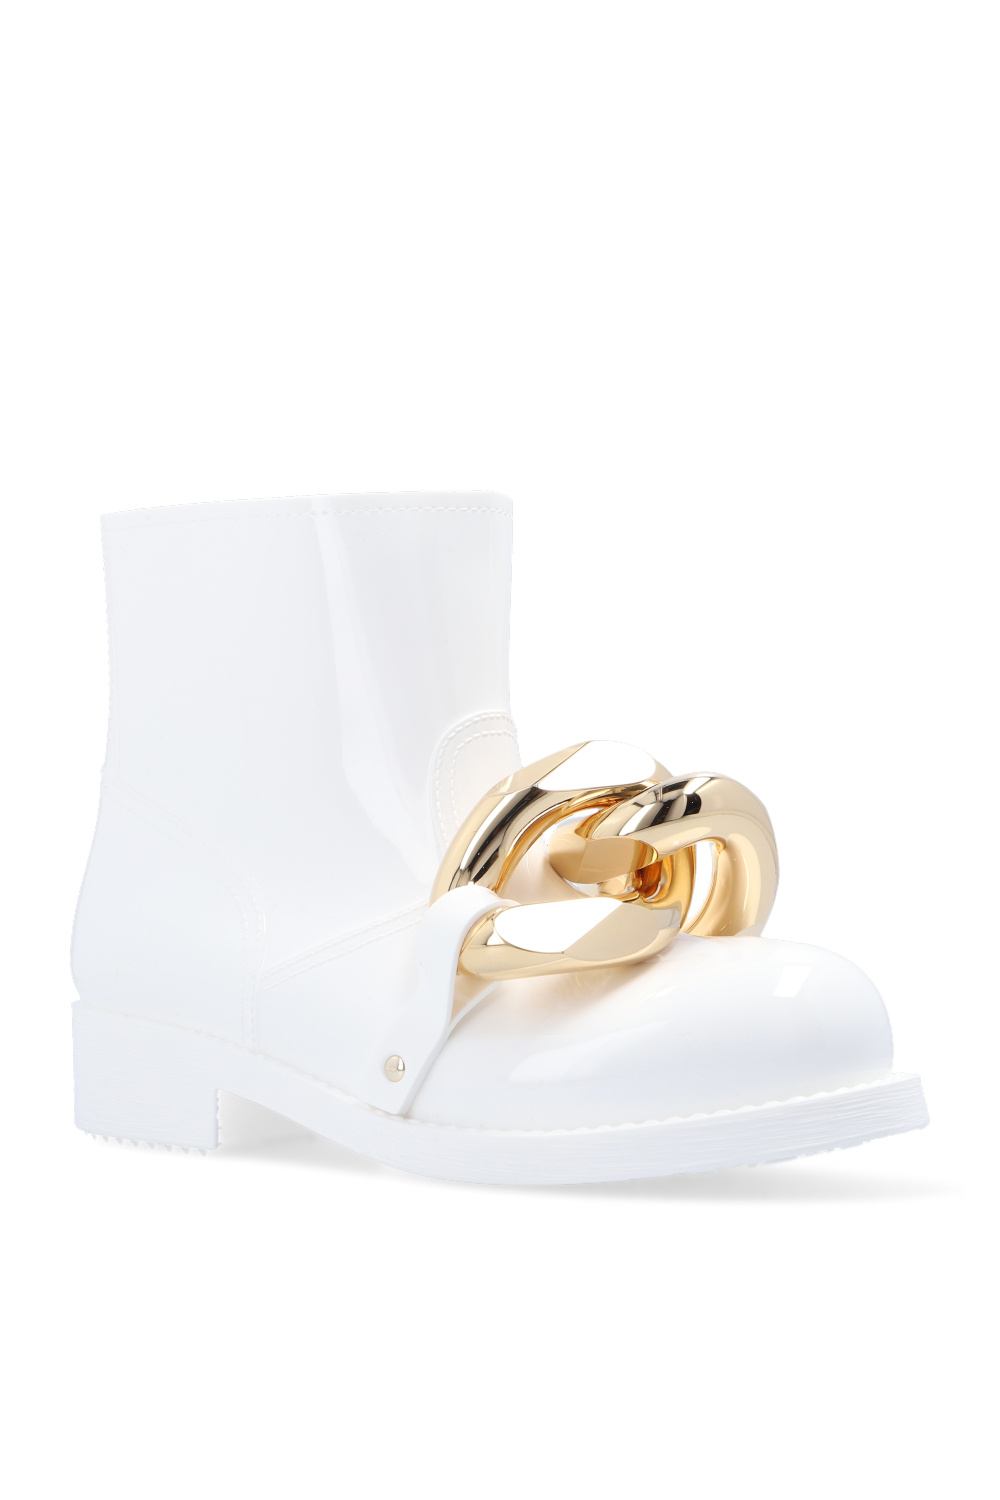 JW Anderson Love Moschino Shoes for Women